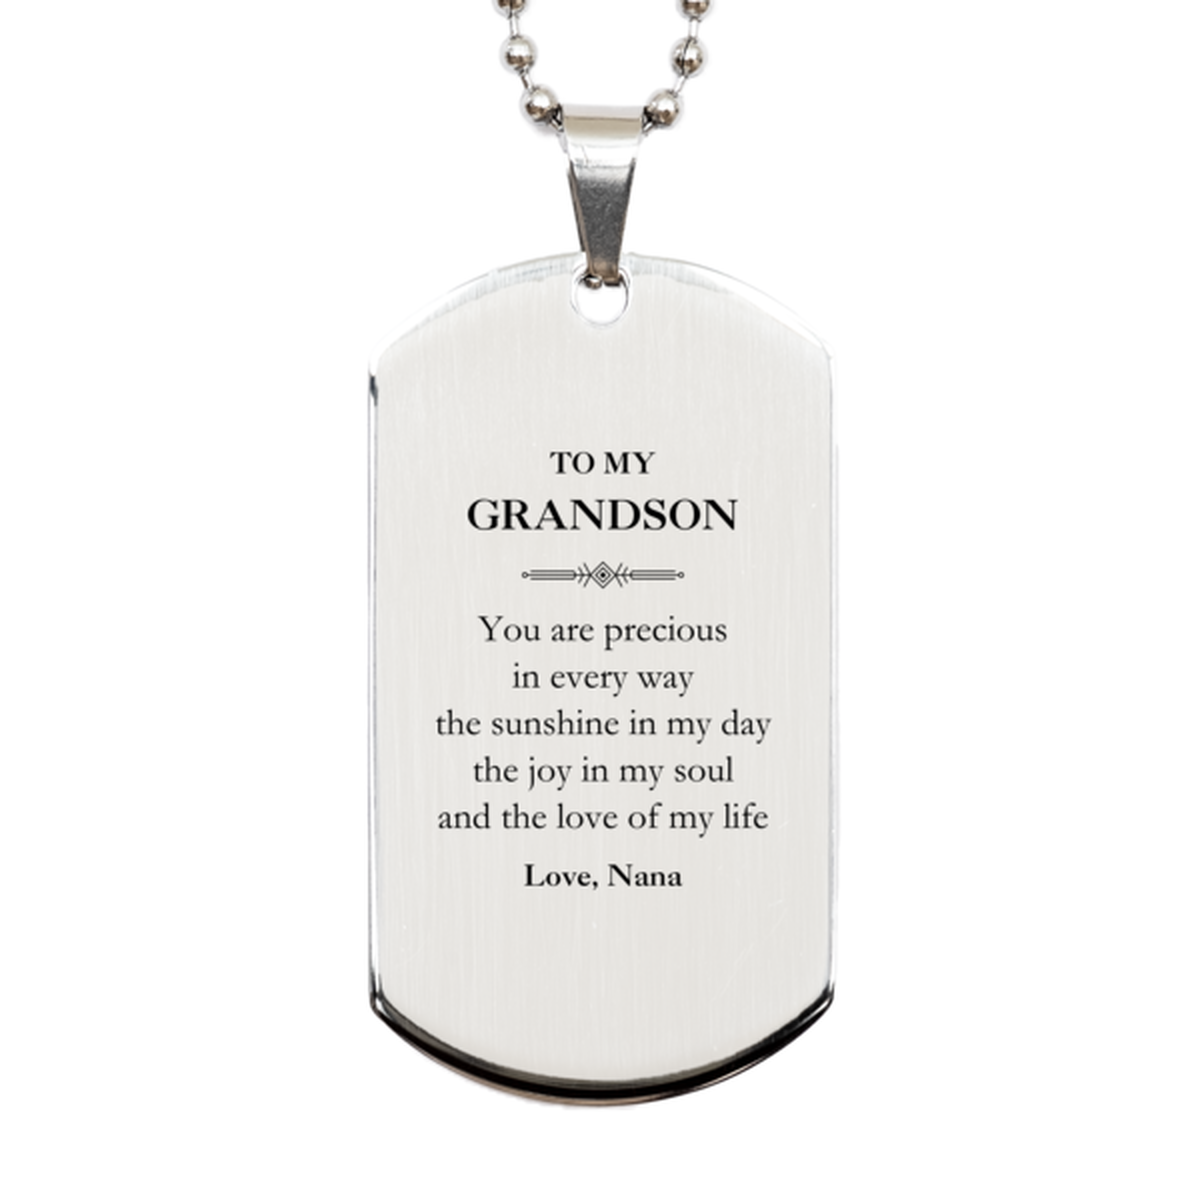 Graduation Gifts for Grandson Silver Dog Tag Present from Nana, Christmas Grandson Birthday Gifts Grandson You are precious in every way the sunshine in my day. Love, Nana